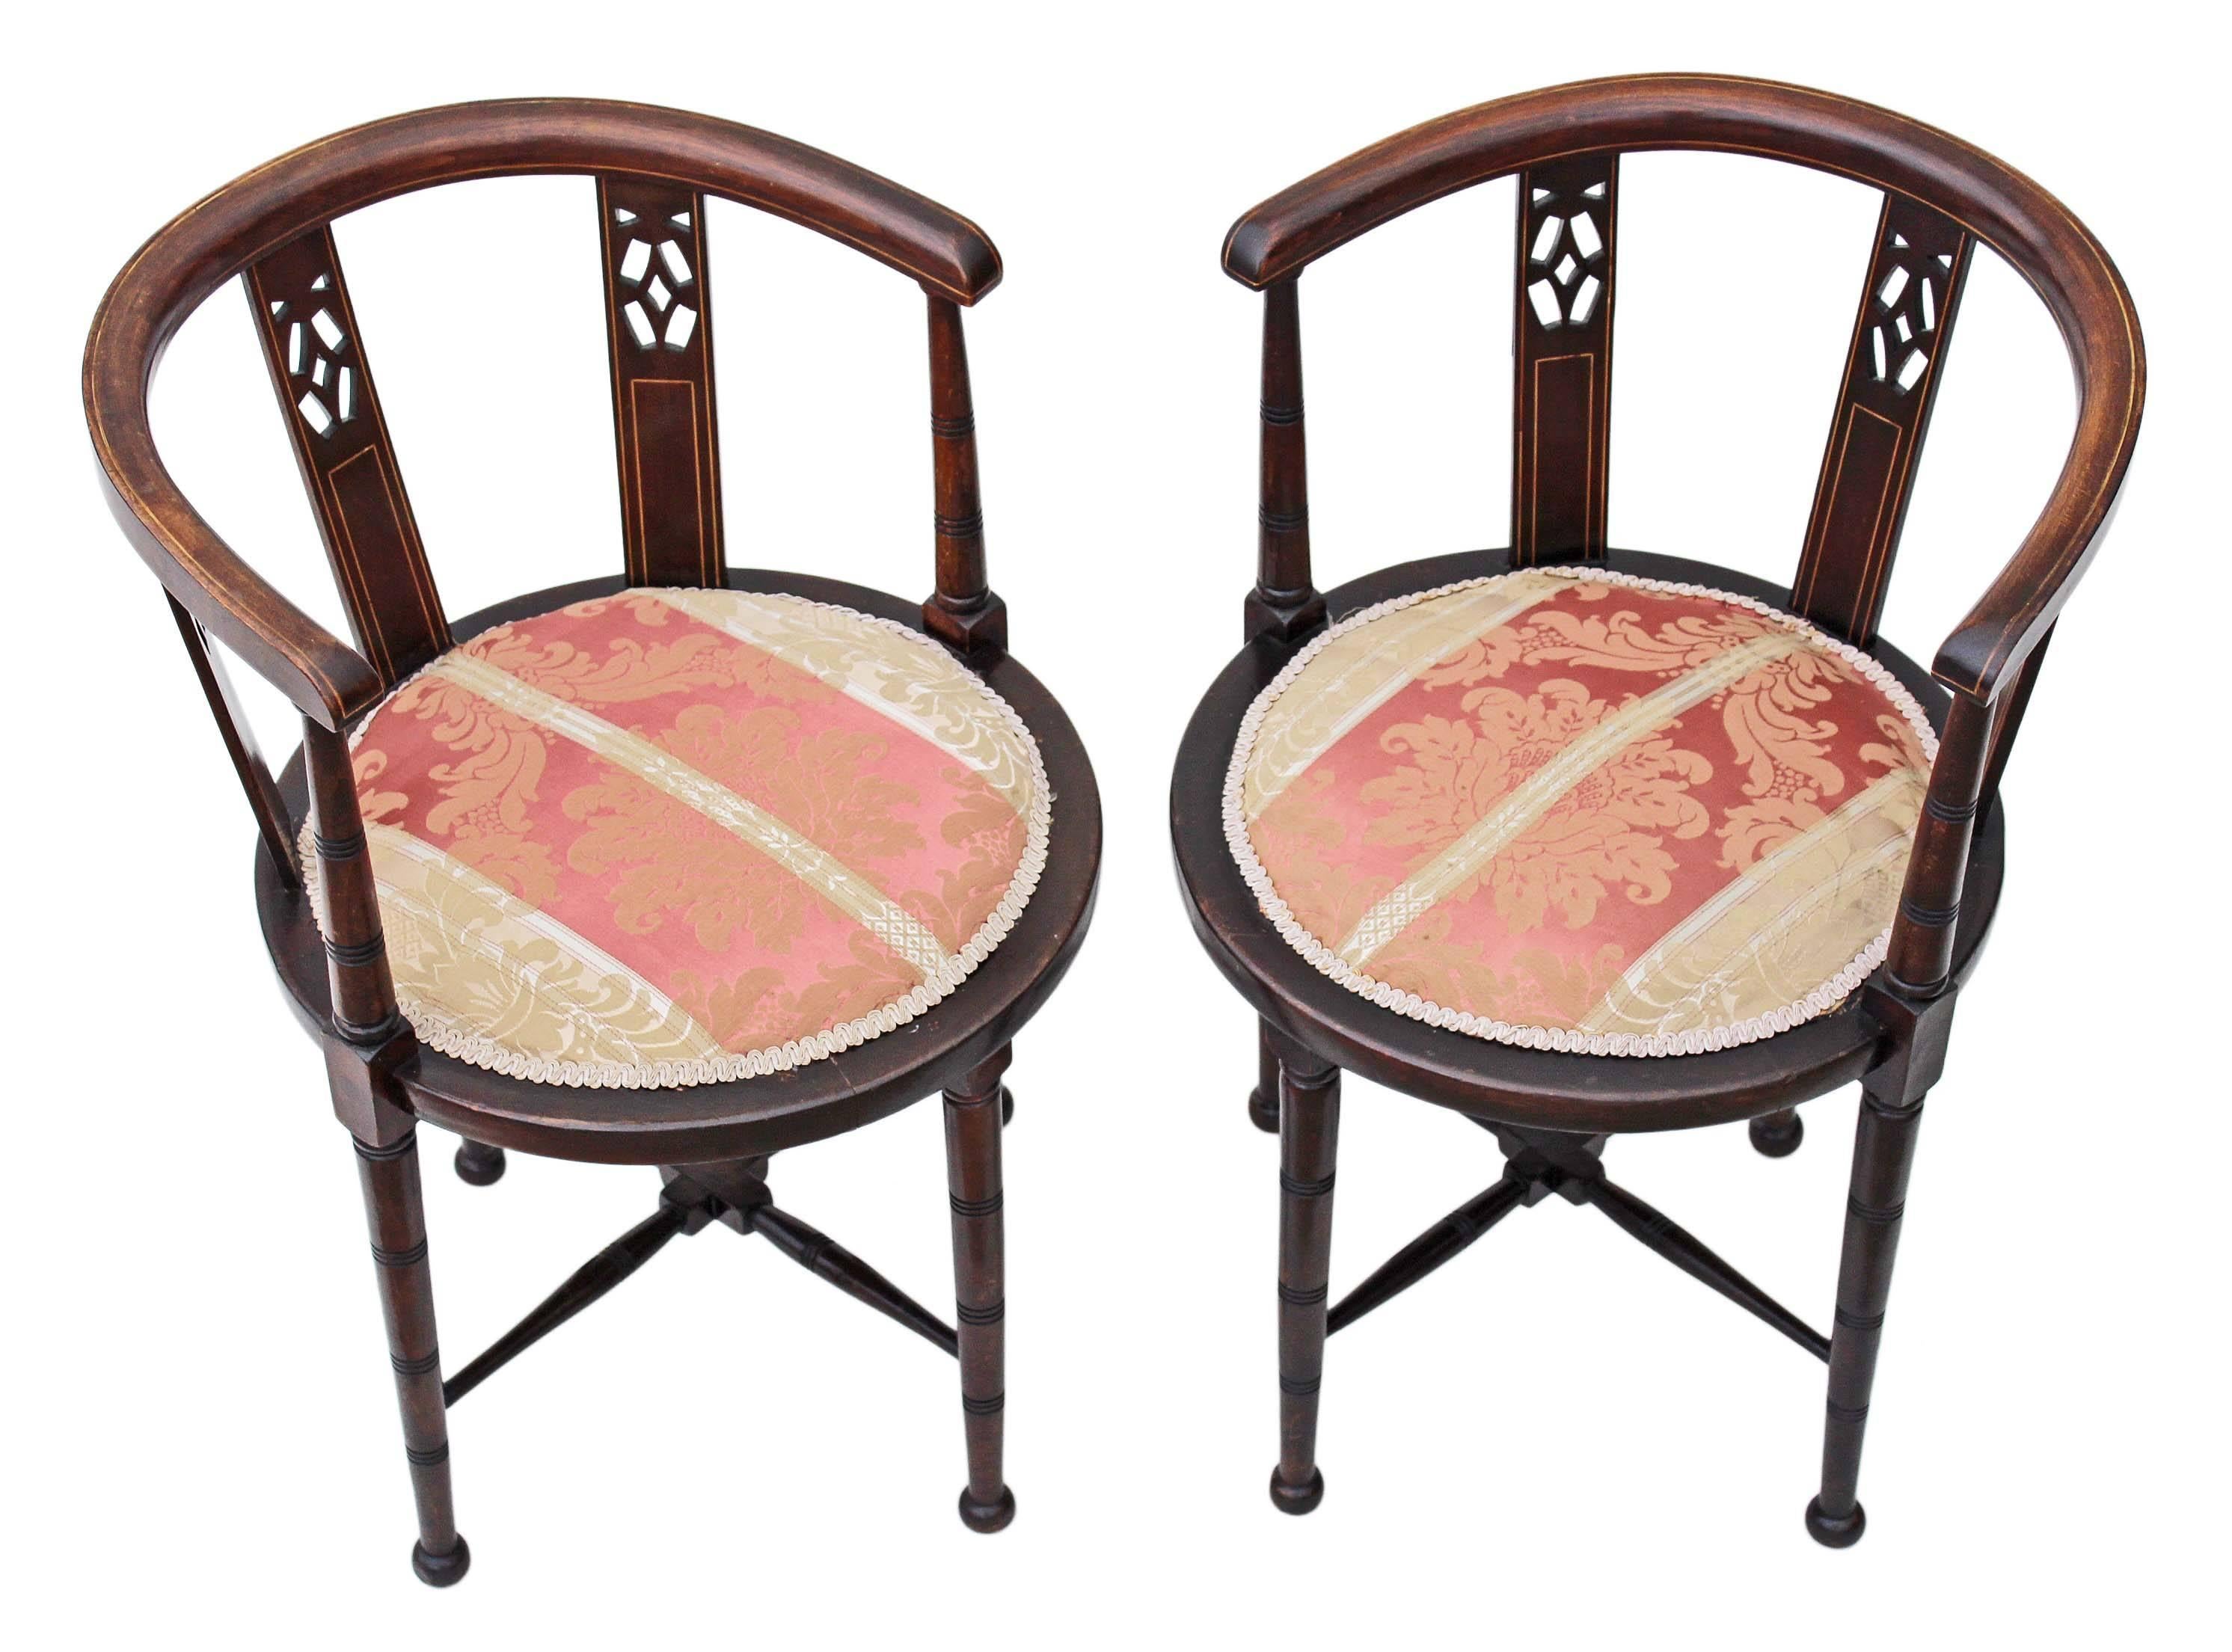 Antique pair of Edwardian (early 20th century) inlaid mahogany and beech corner chairs.

A great rare find, with lovely proportions and styling.

A sought after style of chair.

Lovely colour, age, patina and charm.

The seat upholstery is